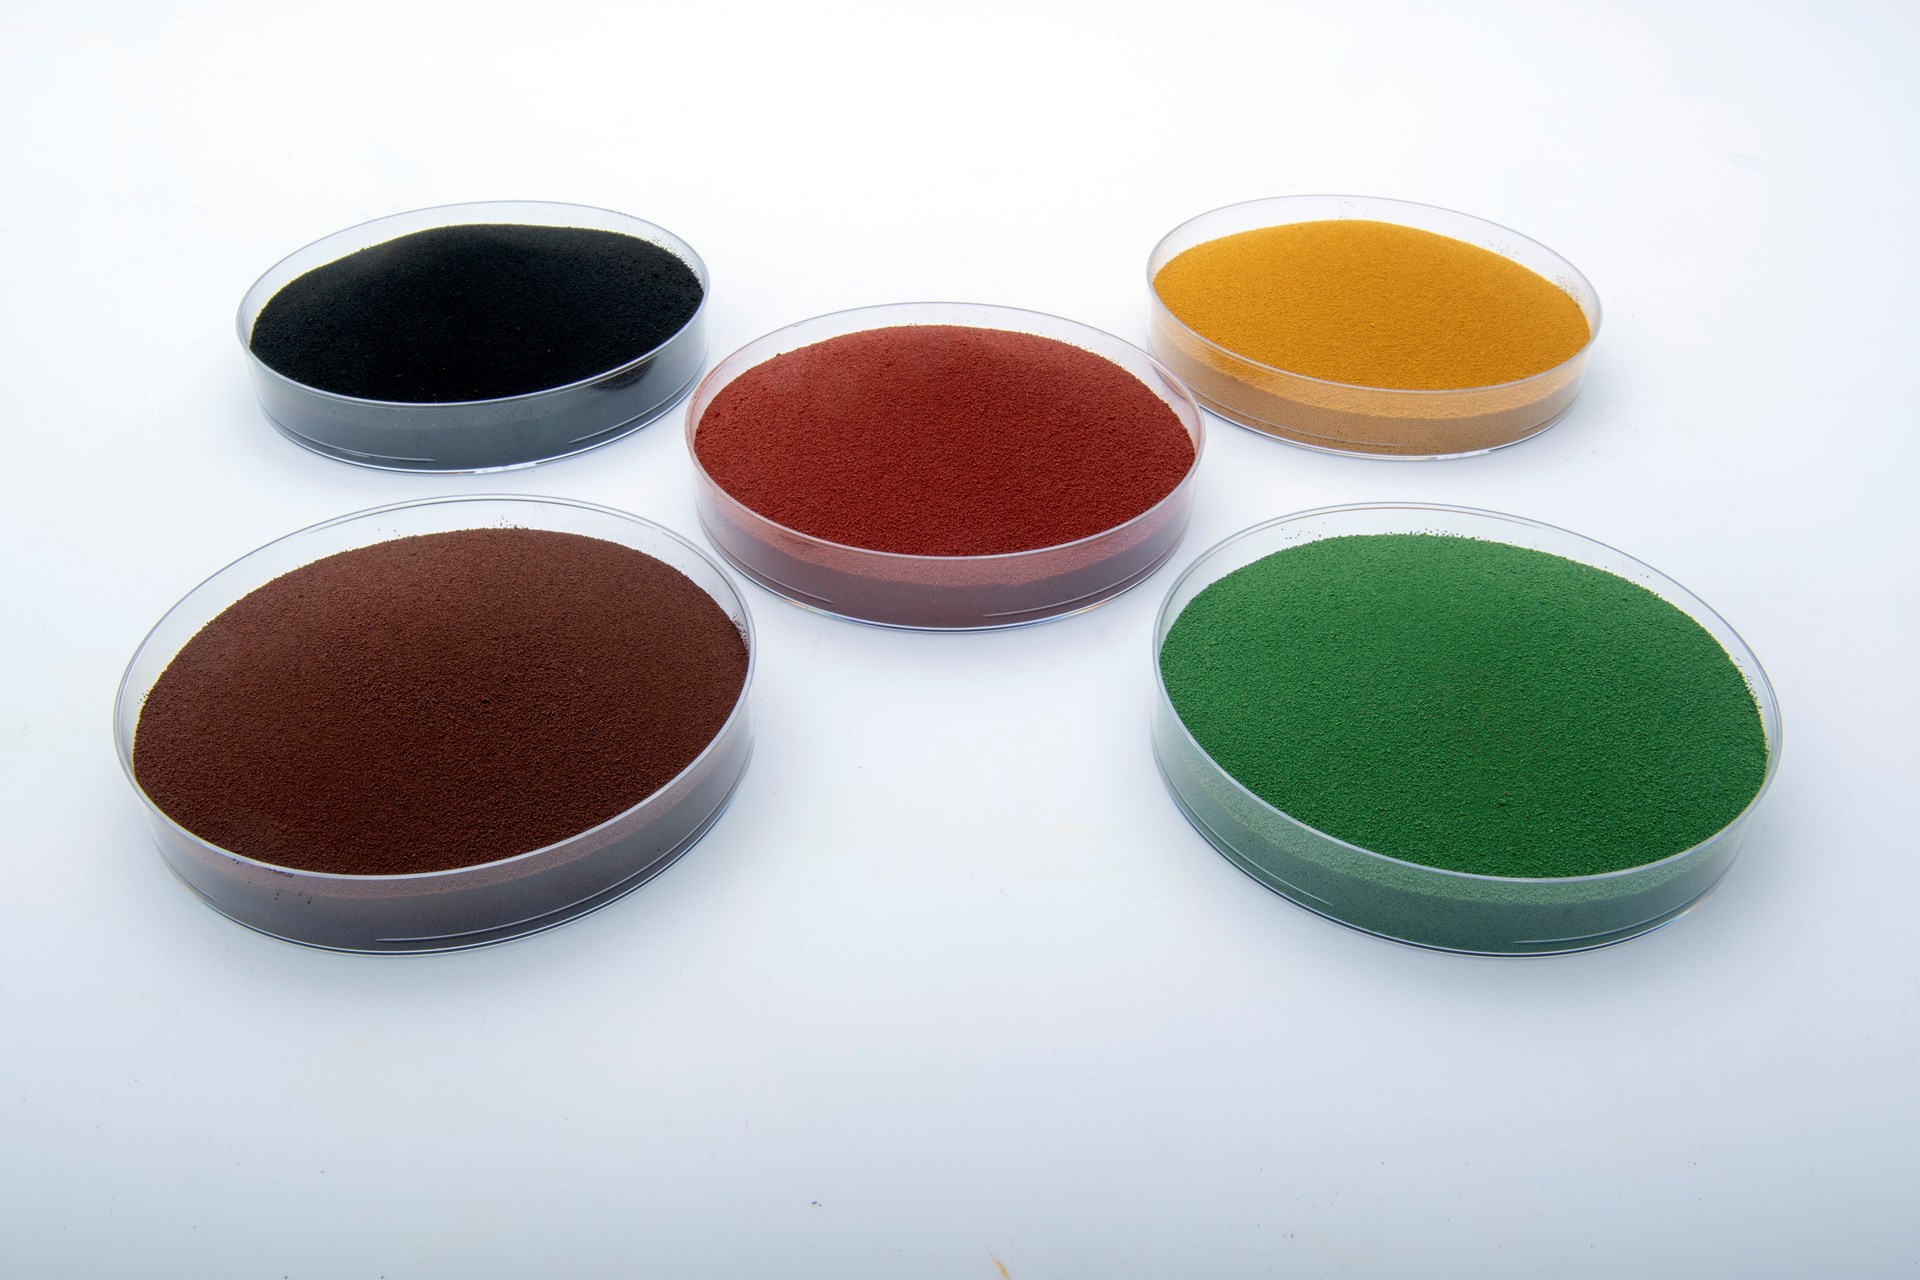 Inorganic pigments of the IPG business unit with the products Bayferrox, Bayoxide and Colortherm